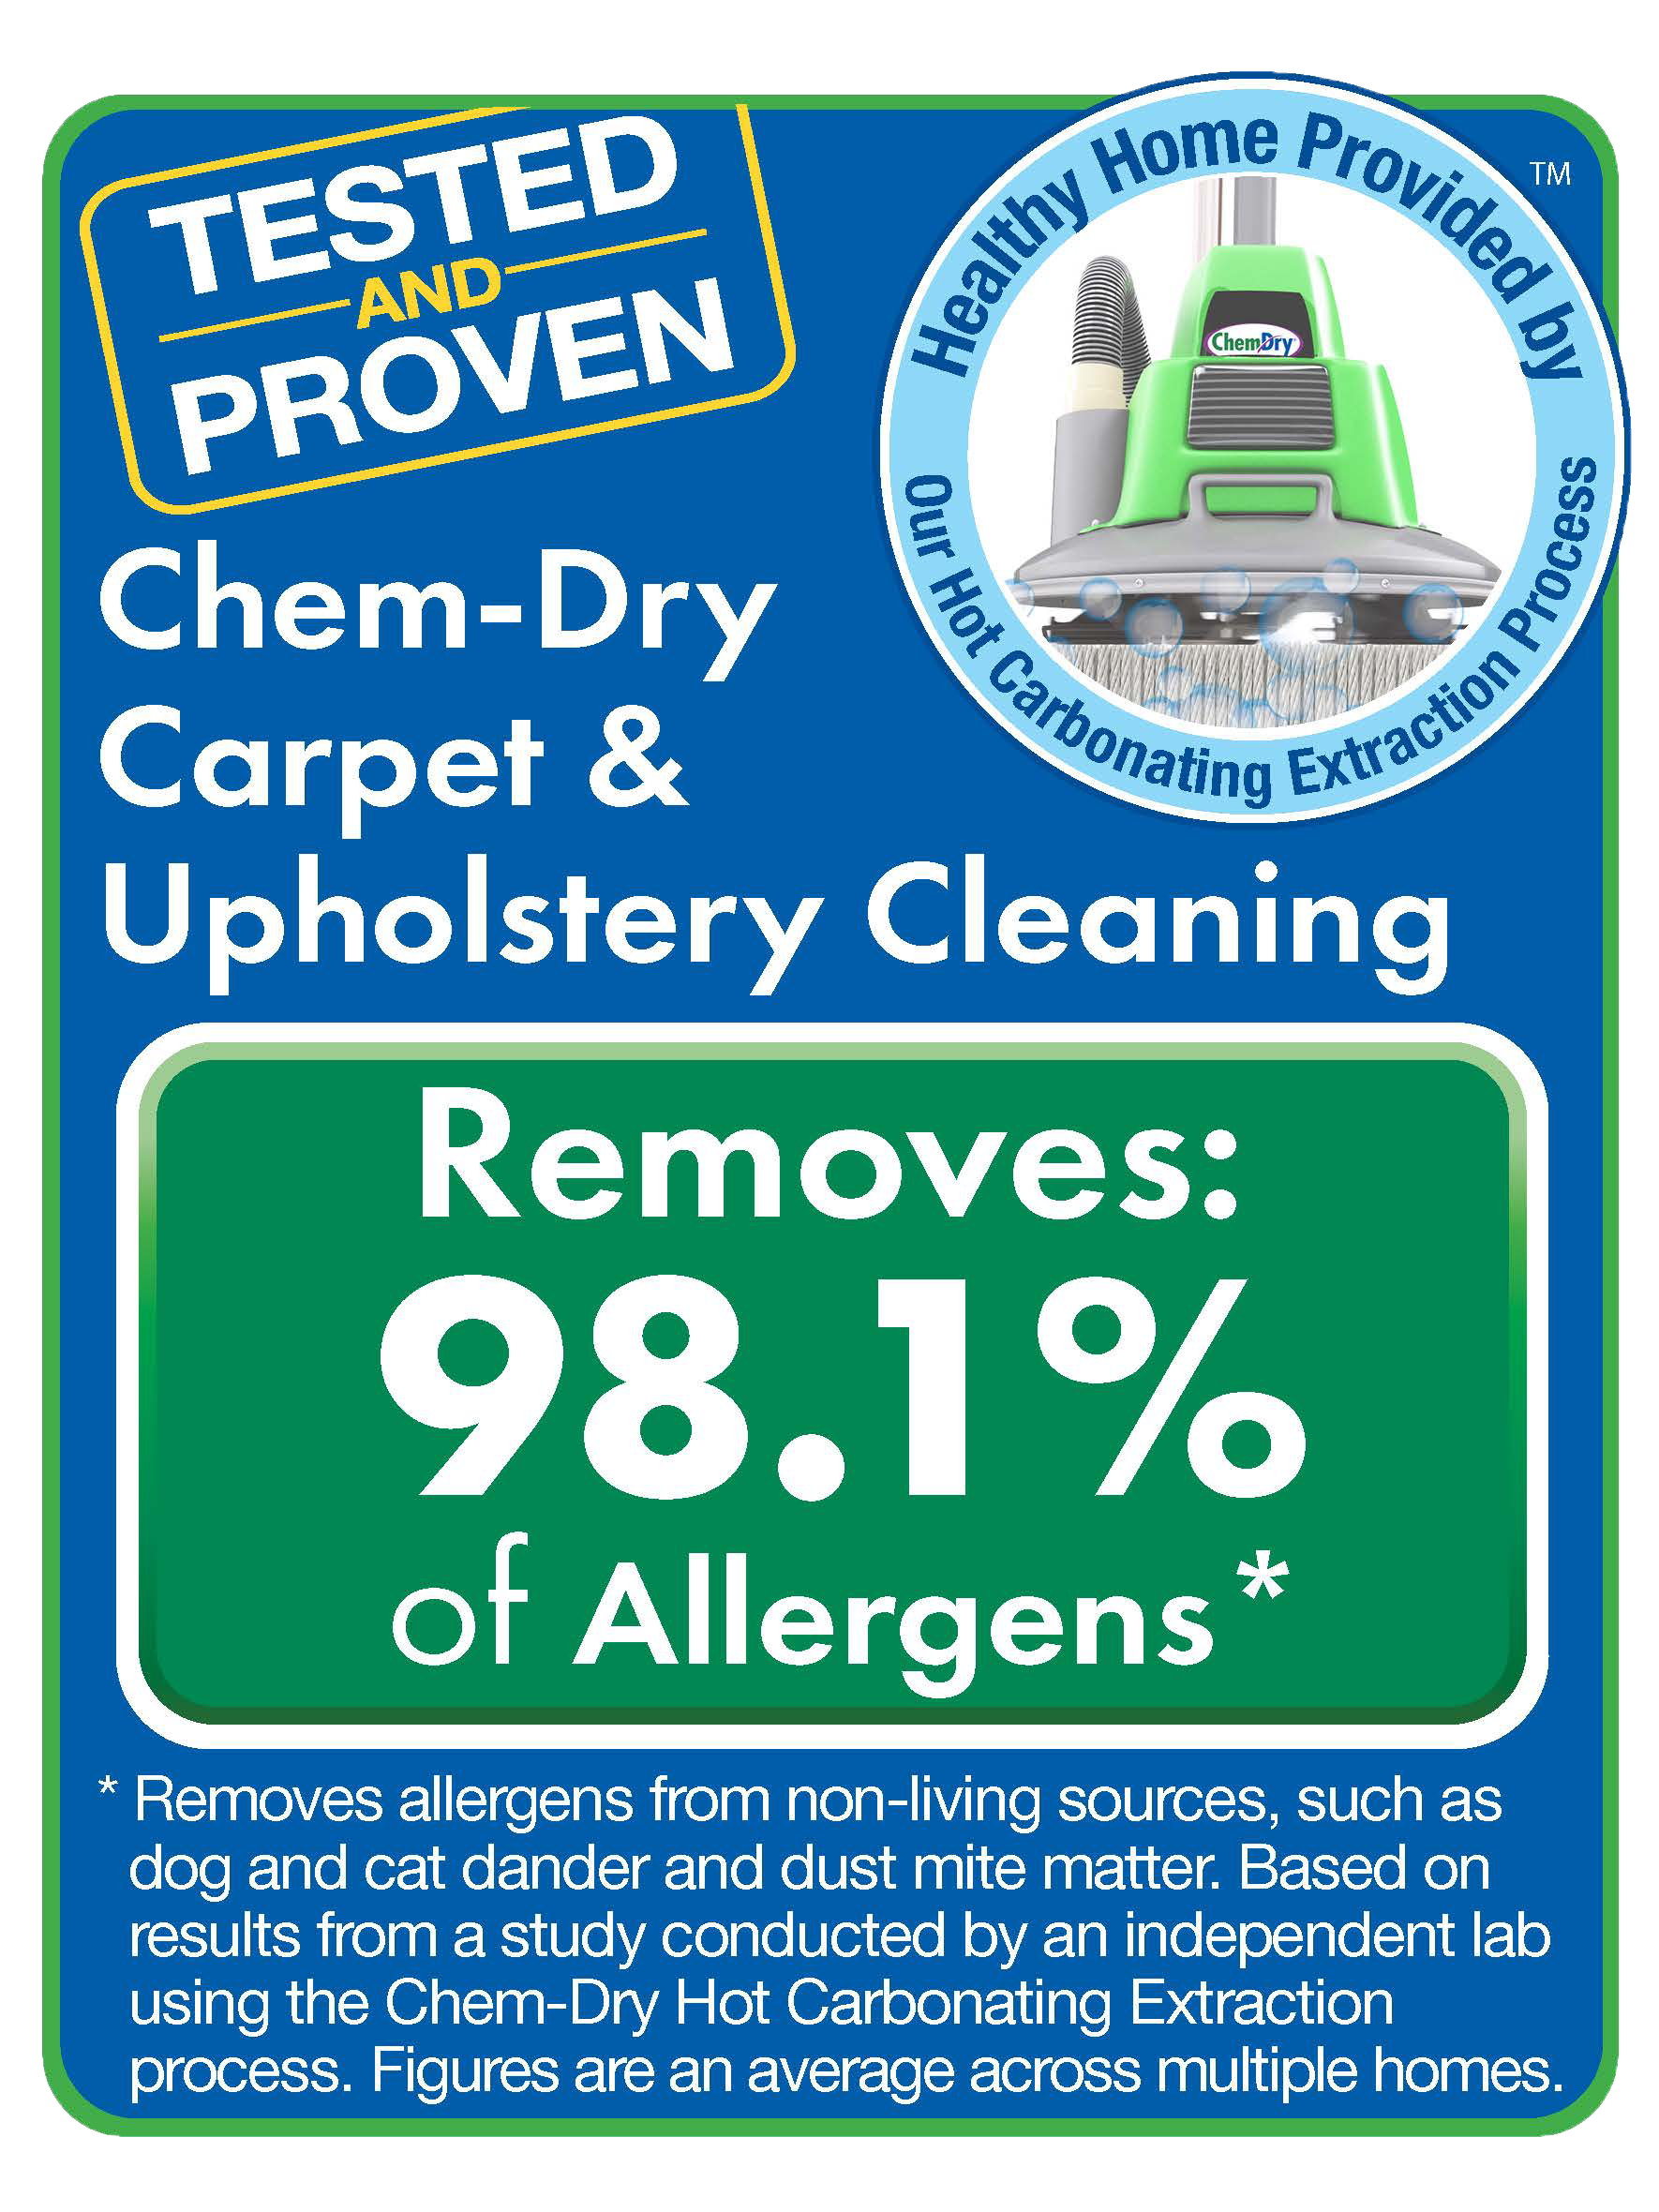 Dry Carpet Cleaning vs. Steam Cleaning